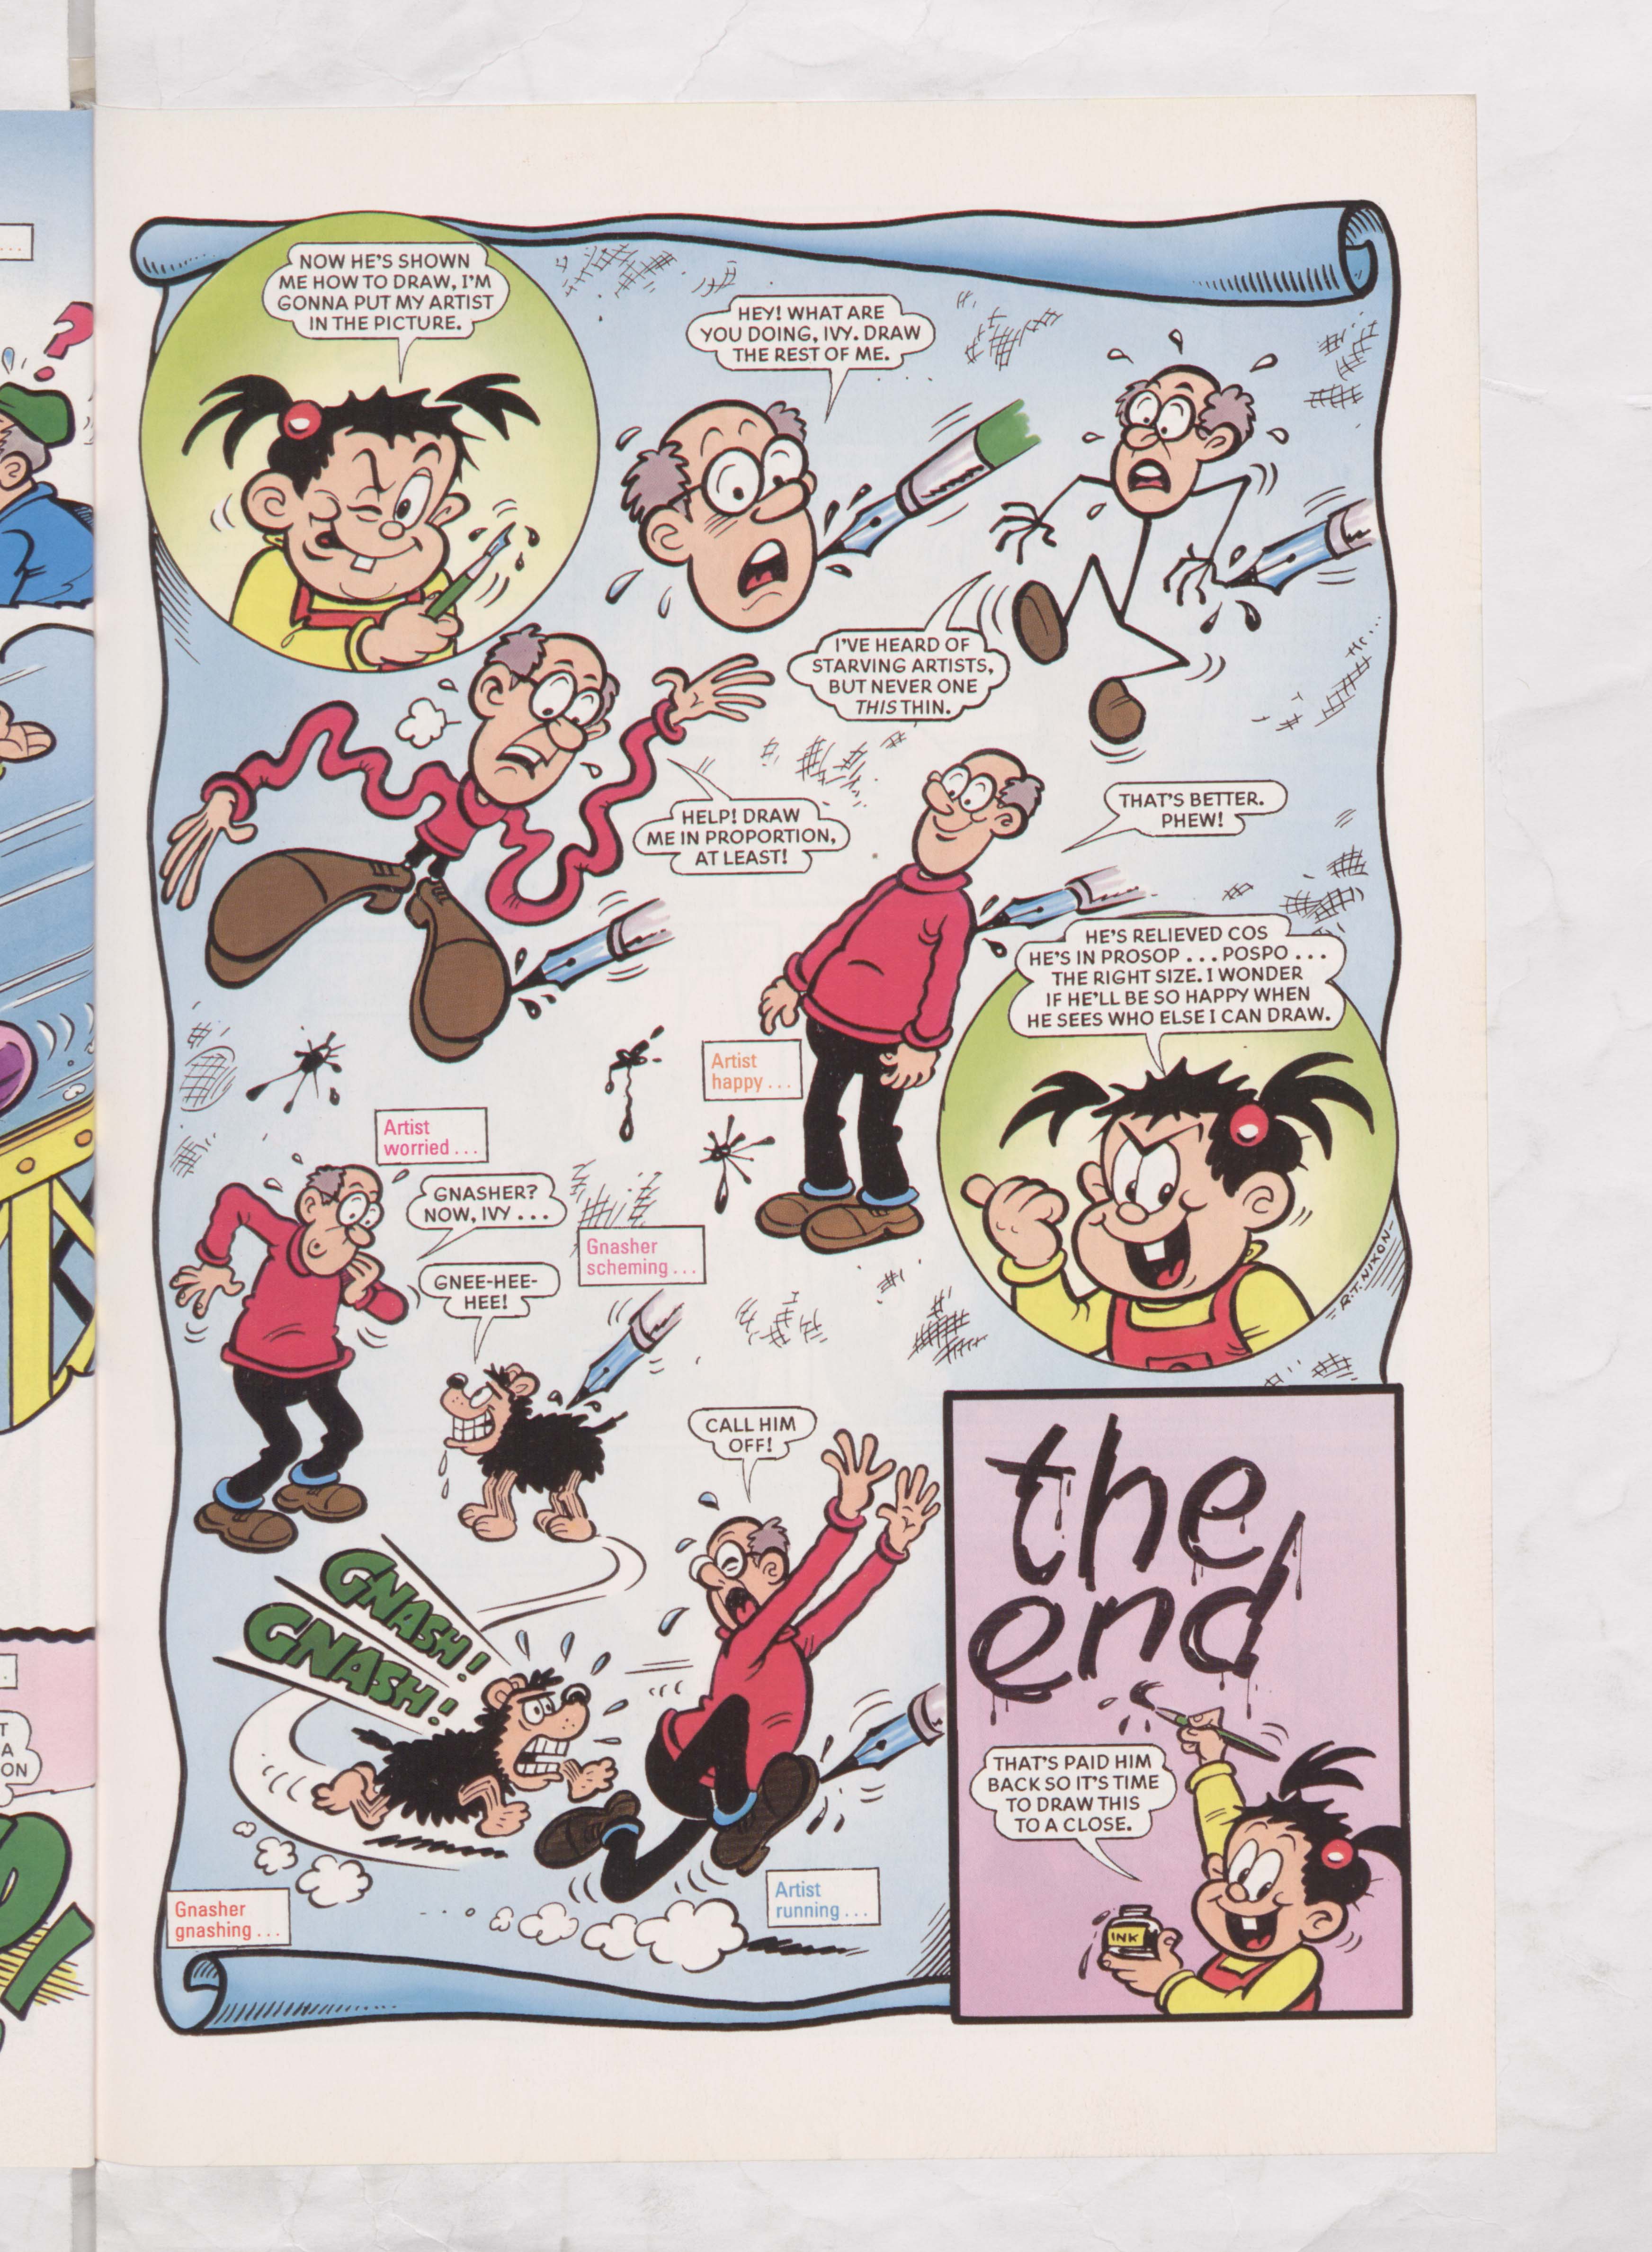 Ivy the Terrible Meets her Maker - Beano Book 2003 Annual